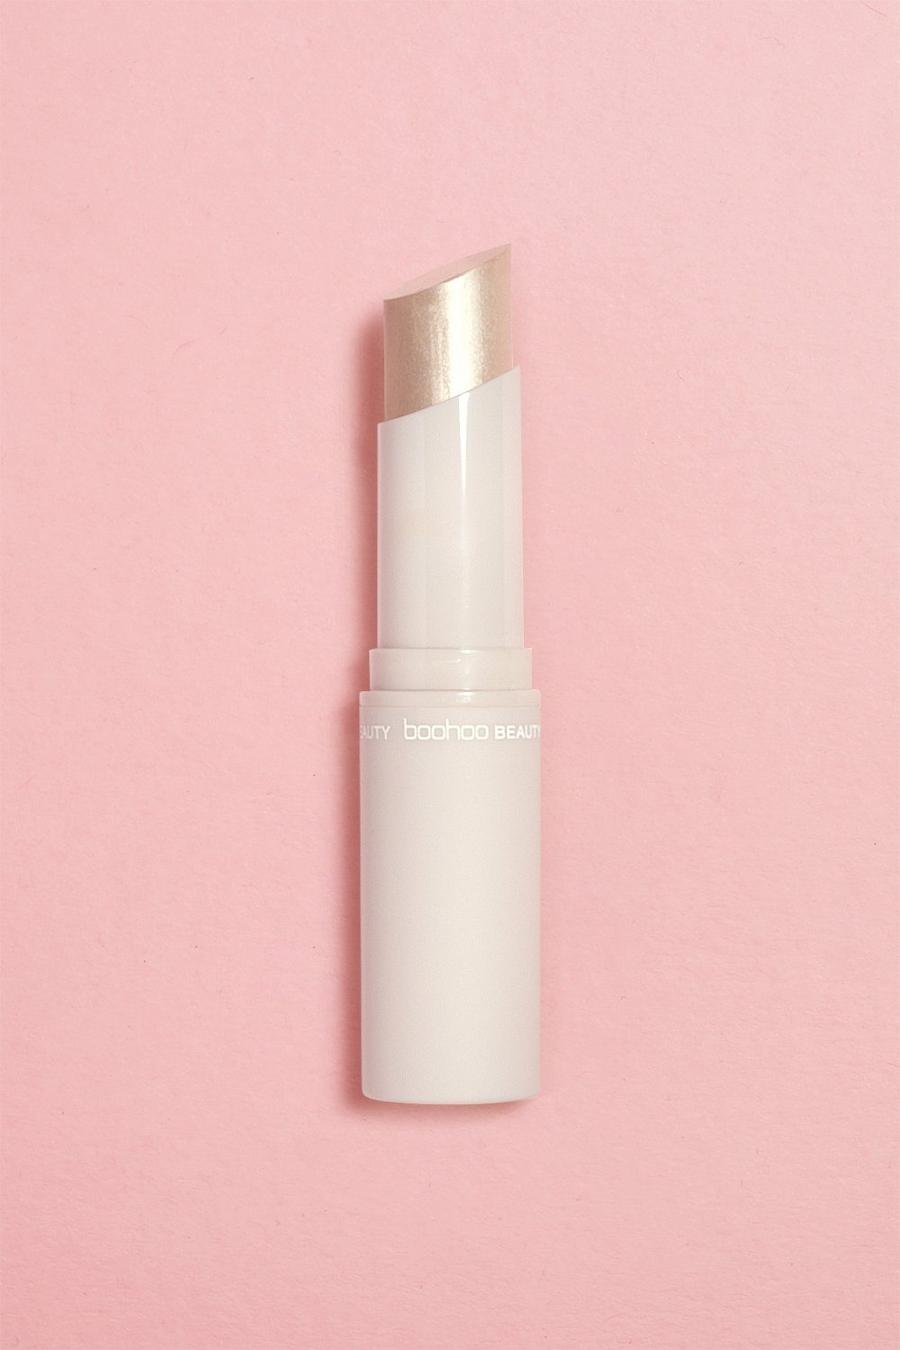 Nude color carne boohoo BEAUTY Highlighter Stick image number 1